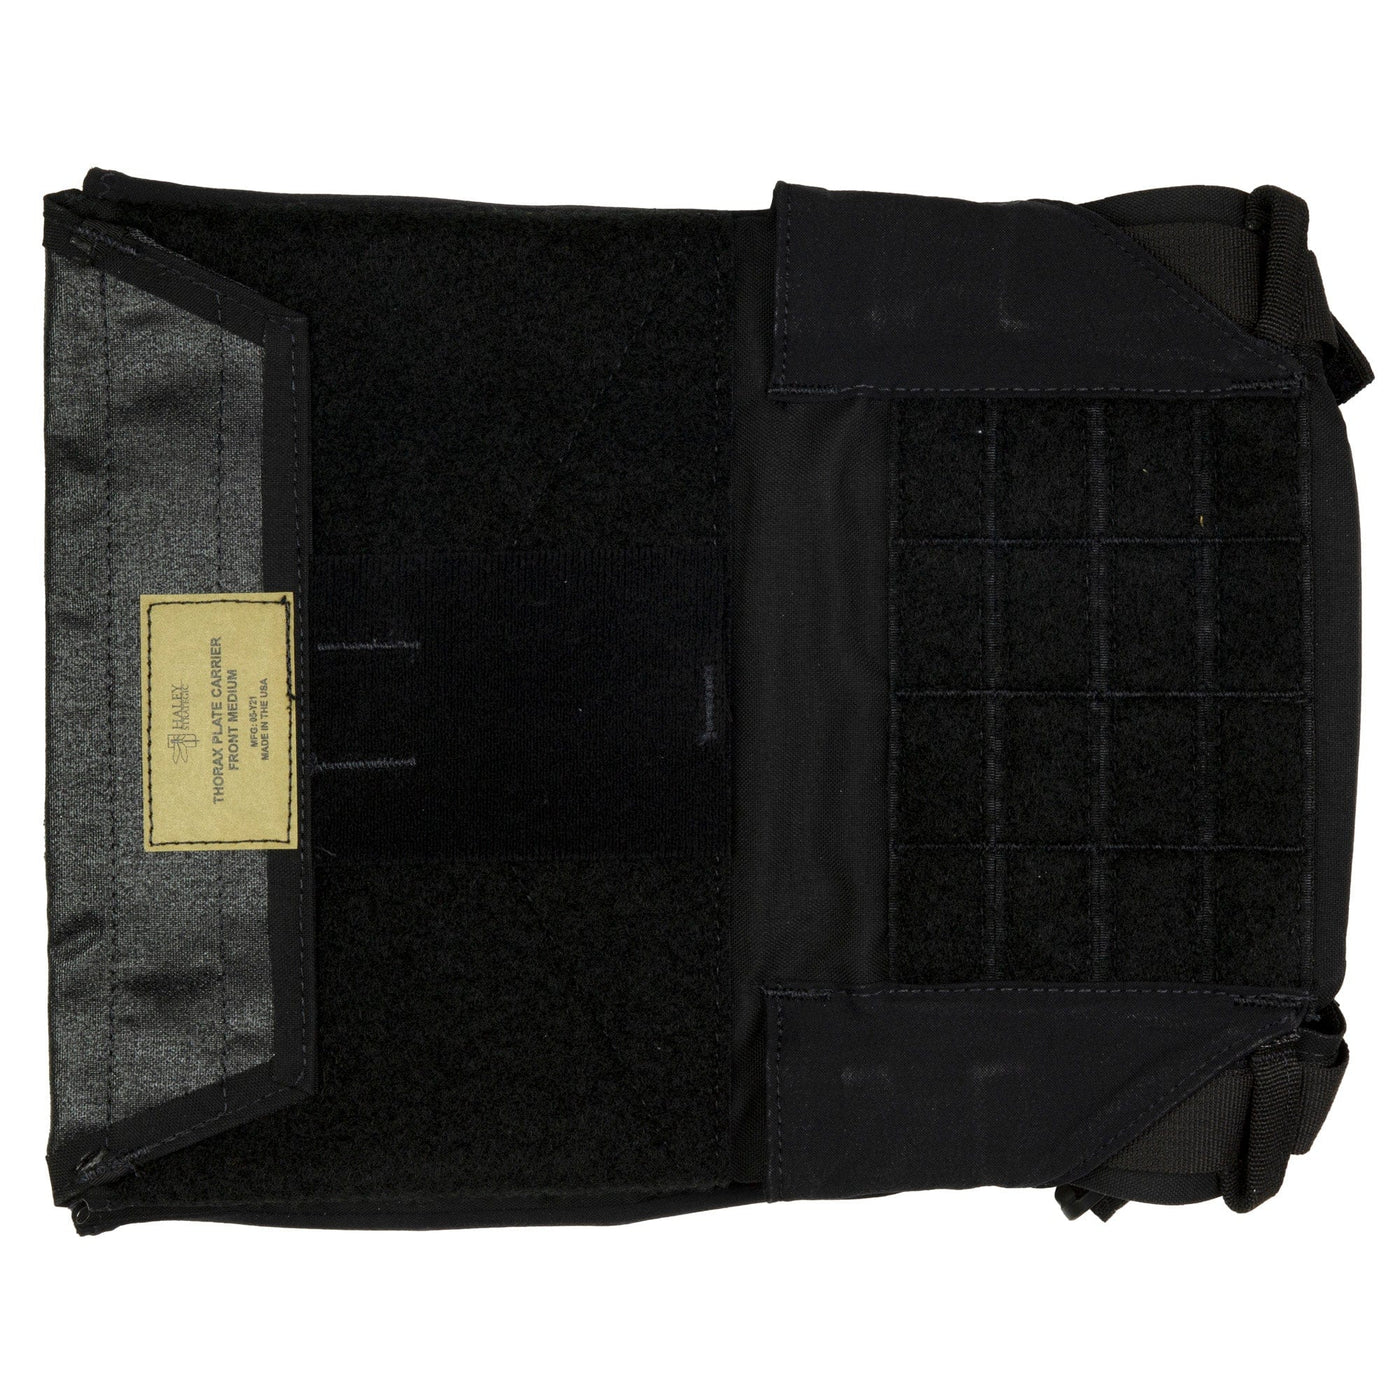 Haley Strategic Partners Hsp Thorax Pc Plate Bags Holsters